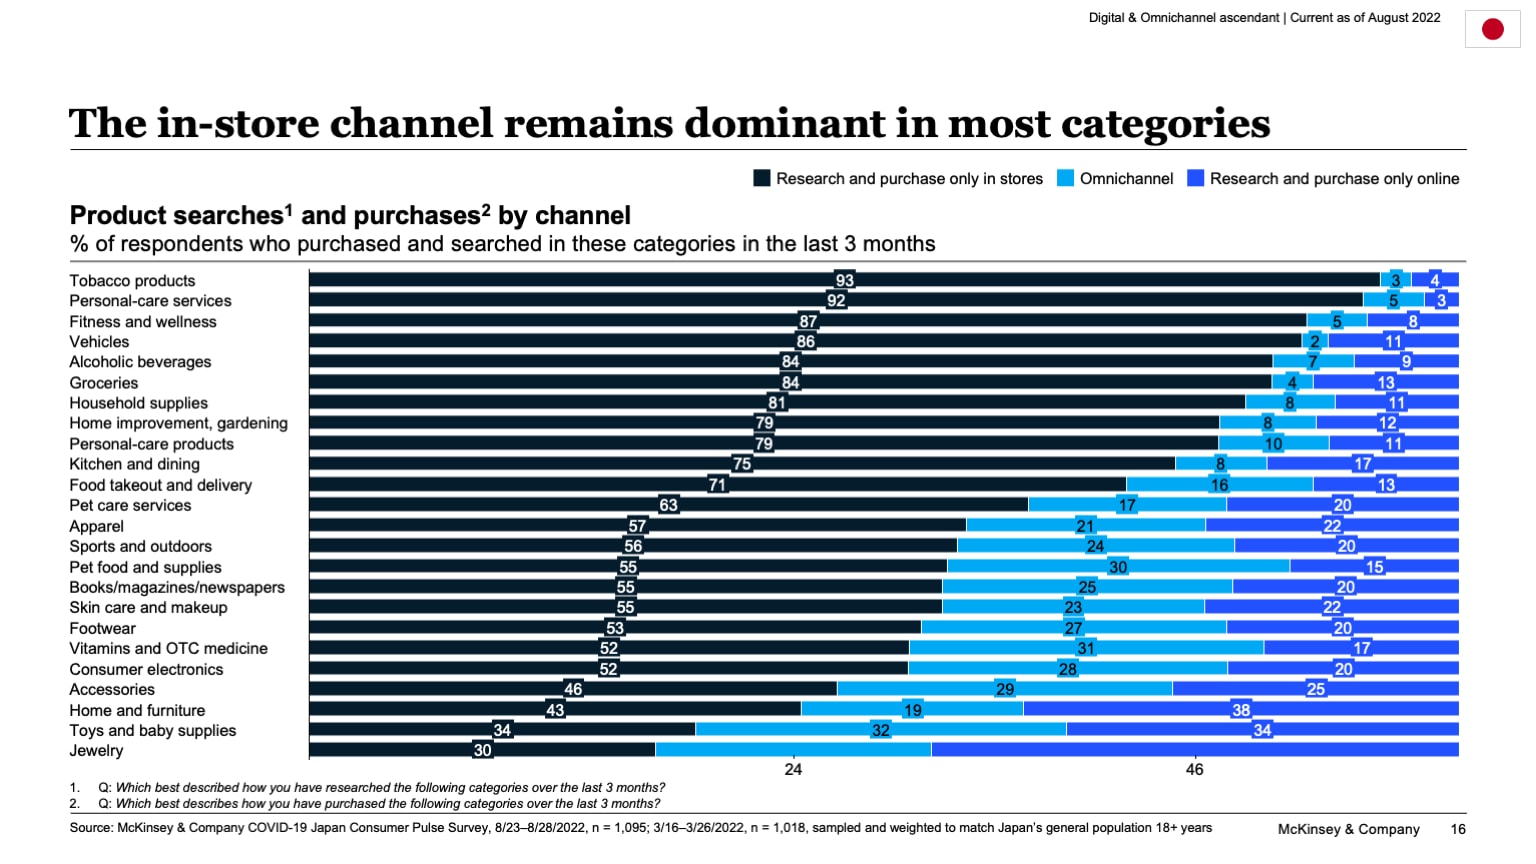 The in-store channel remains dominant in most categories